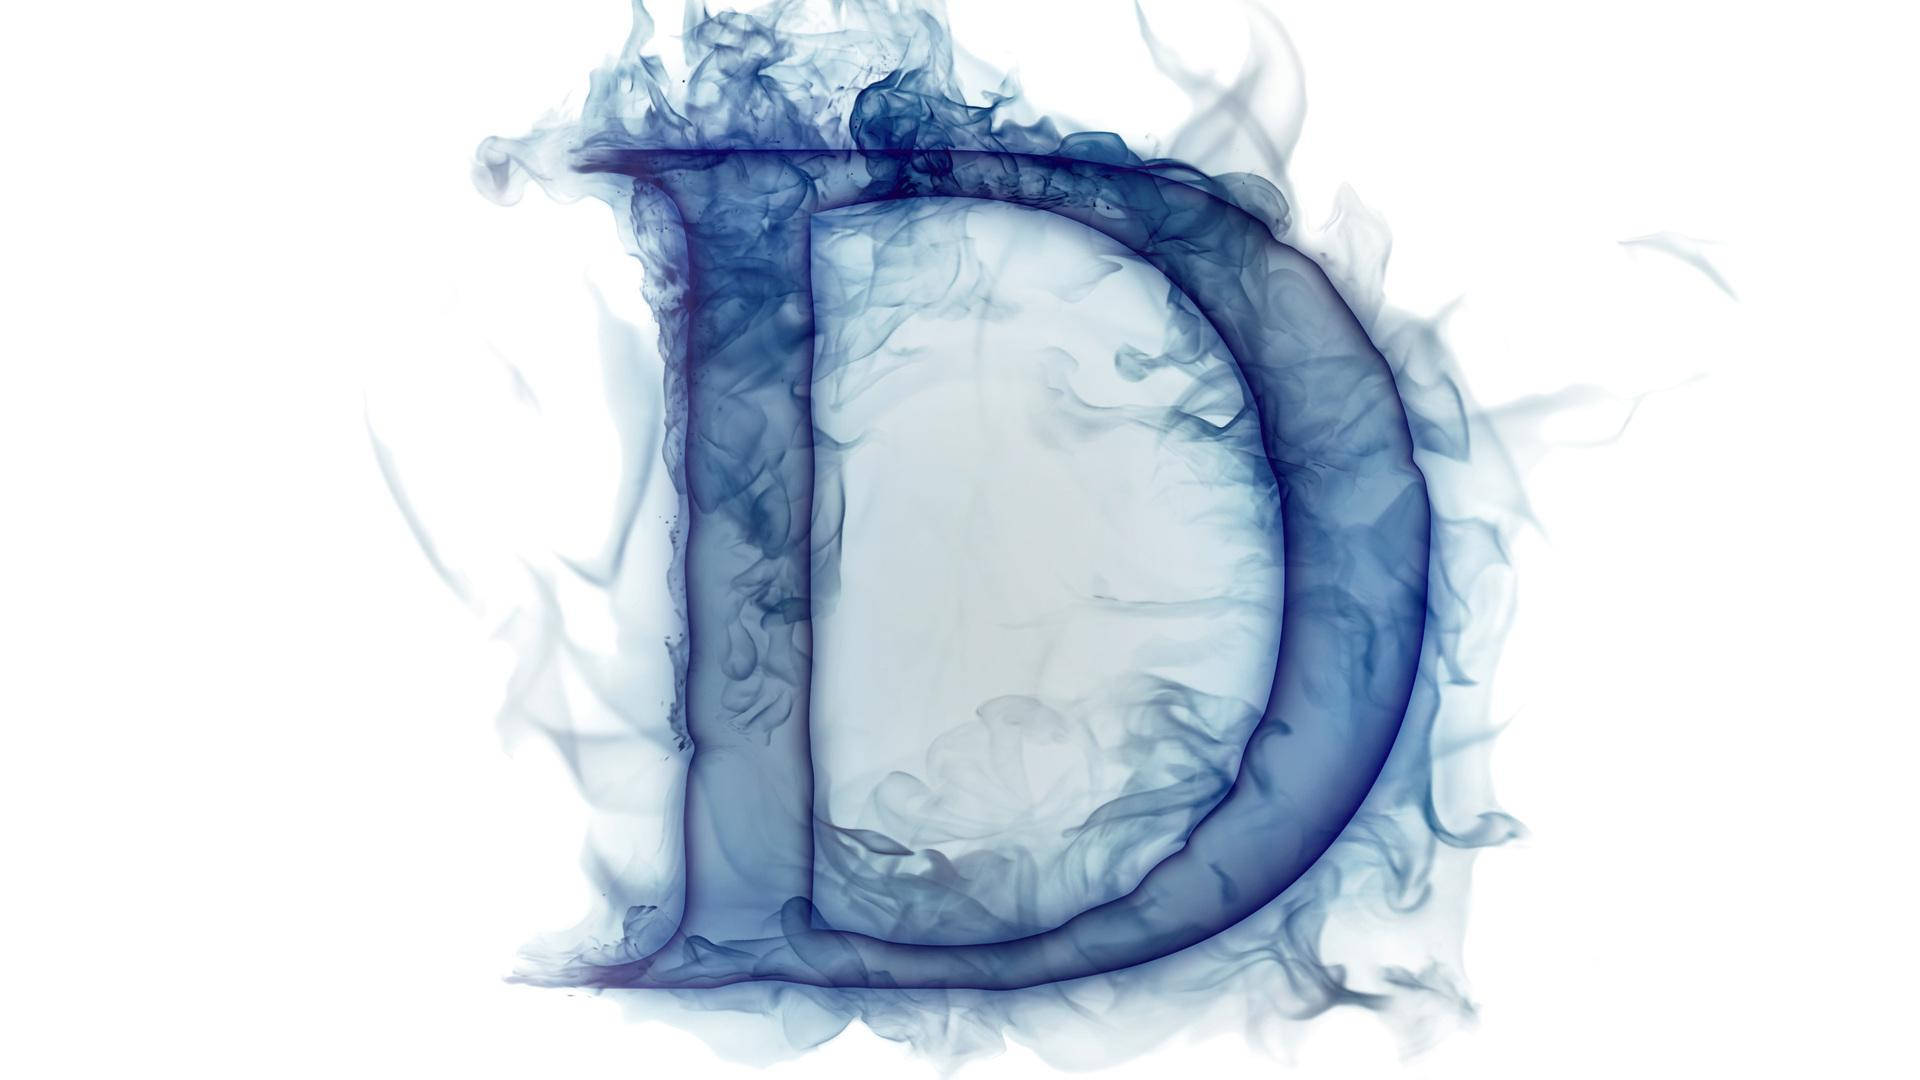 Free Letter D Wallpaper Downloads, [100+] Letter D Wallpapers for FREE |  